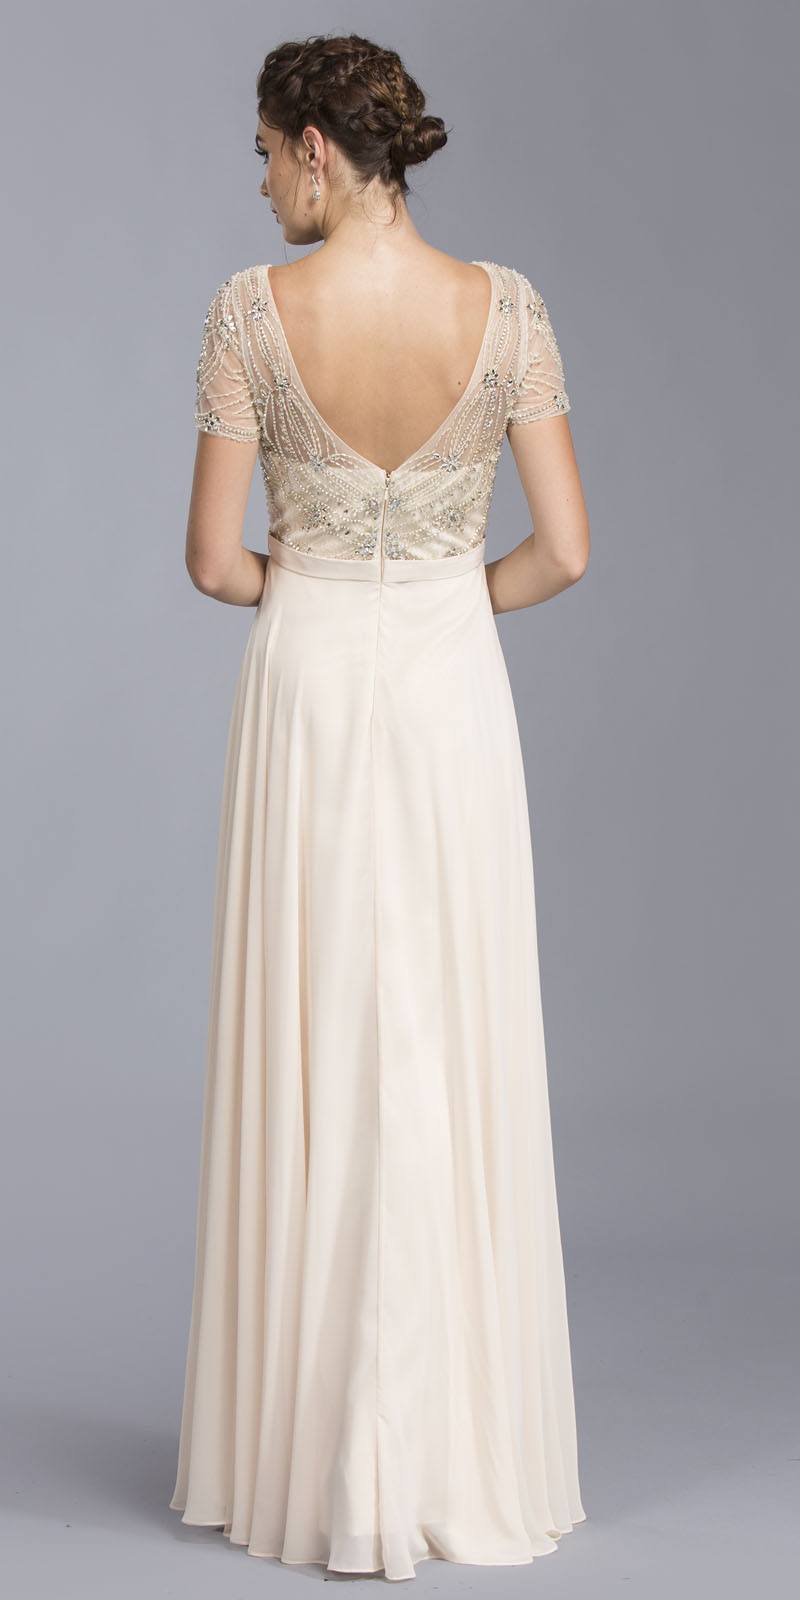 Illusion Short Sleeved Beaded Long Formal Dress Champagne